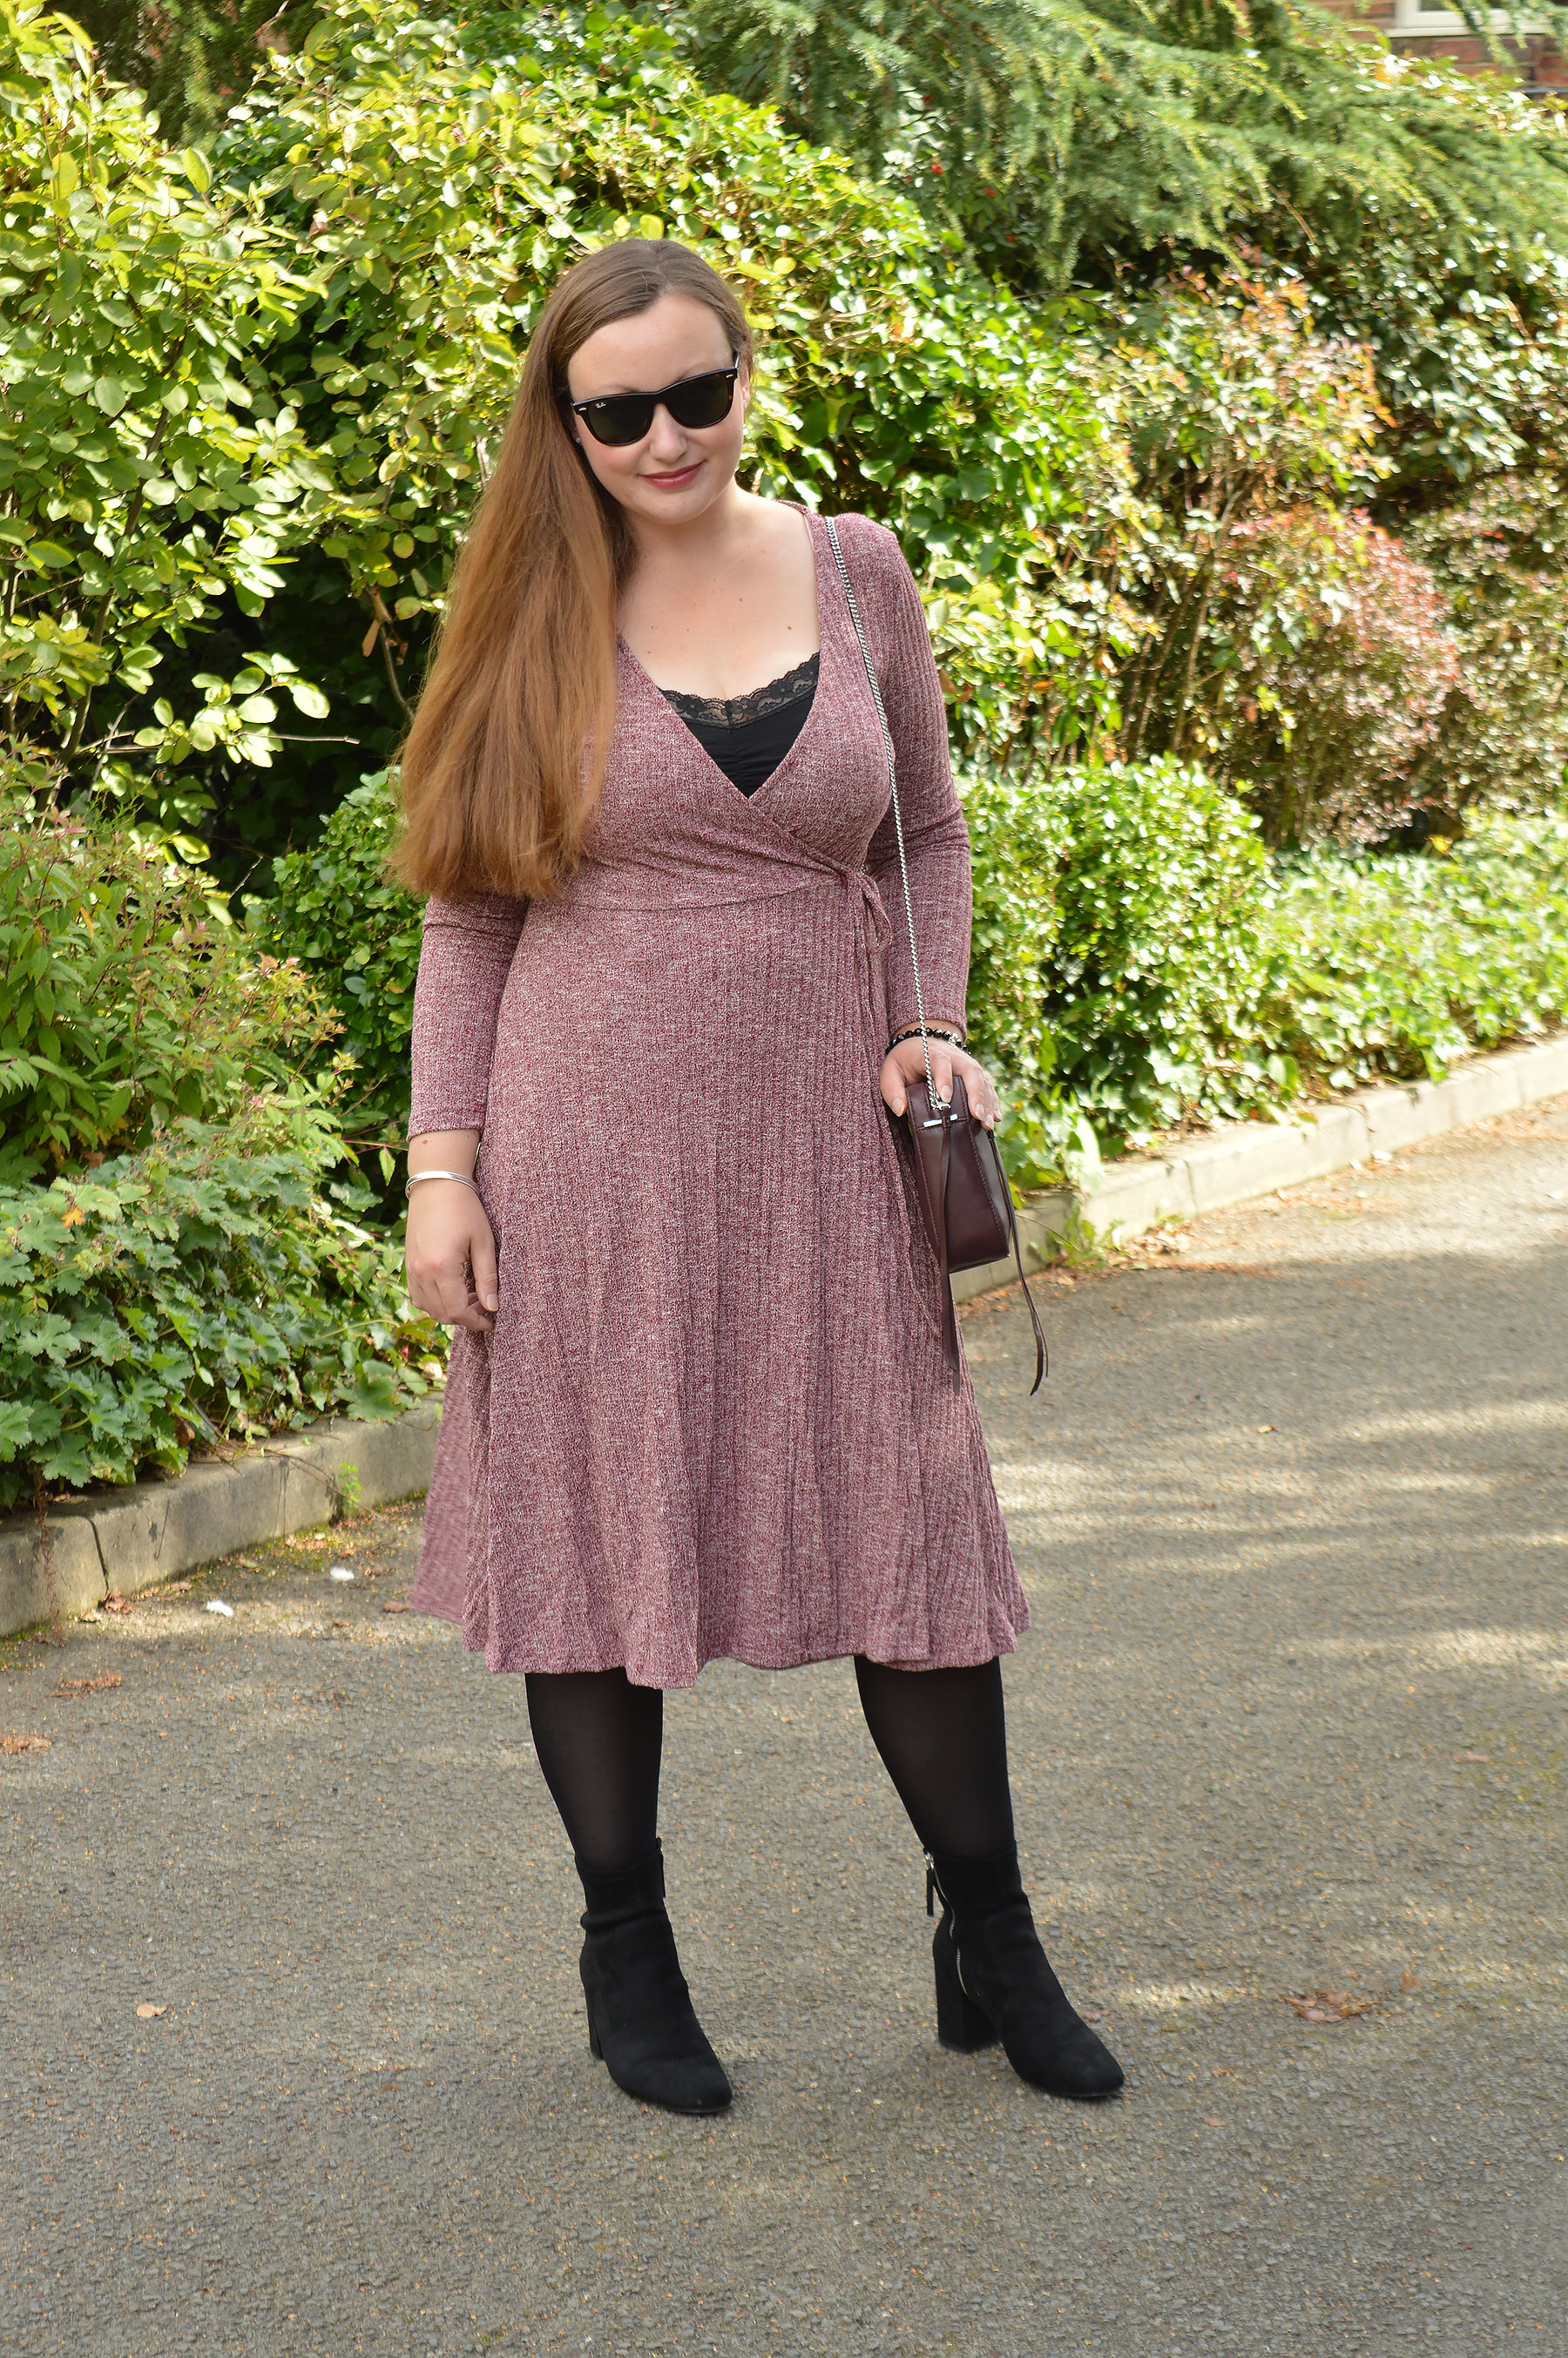 Flattering Wrap dress outfit